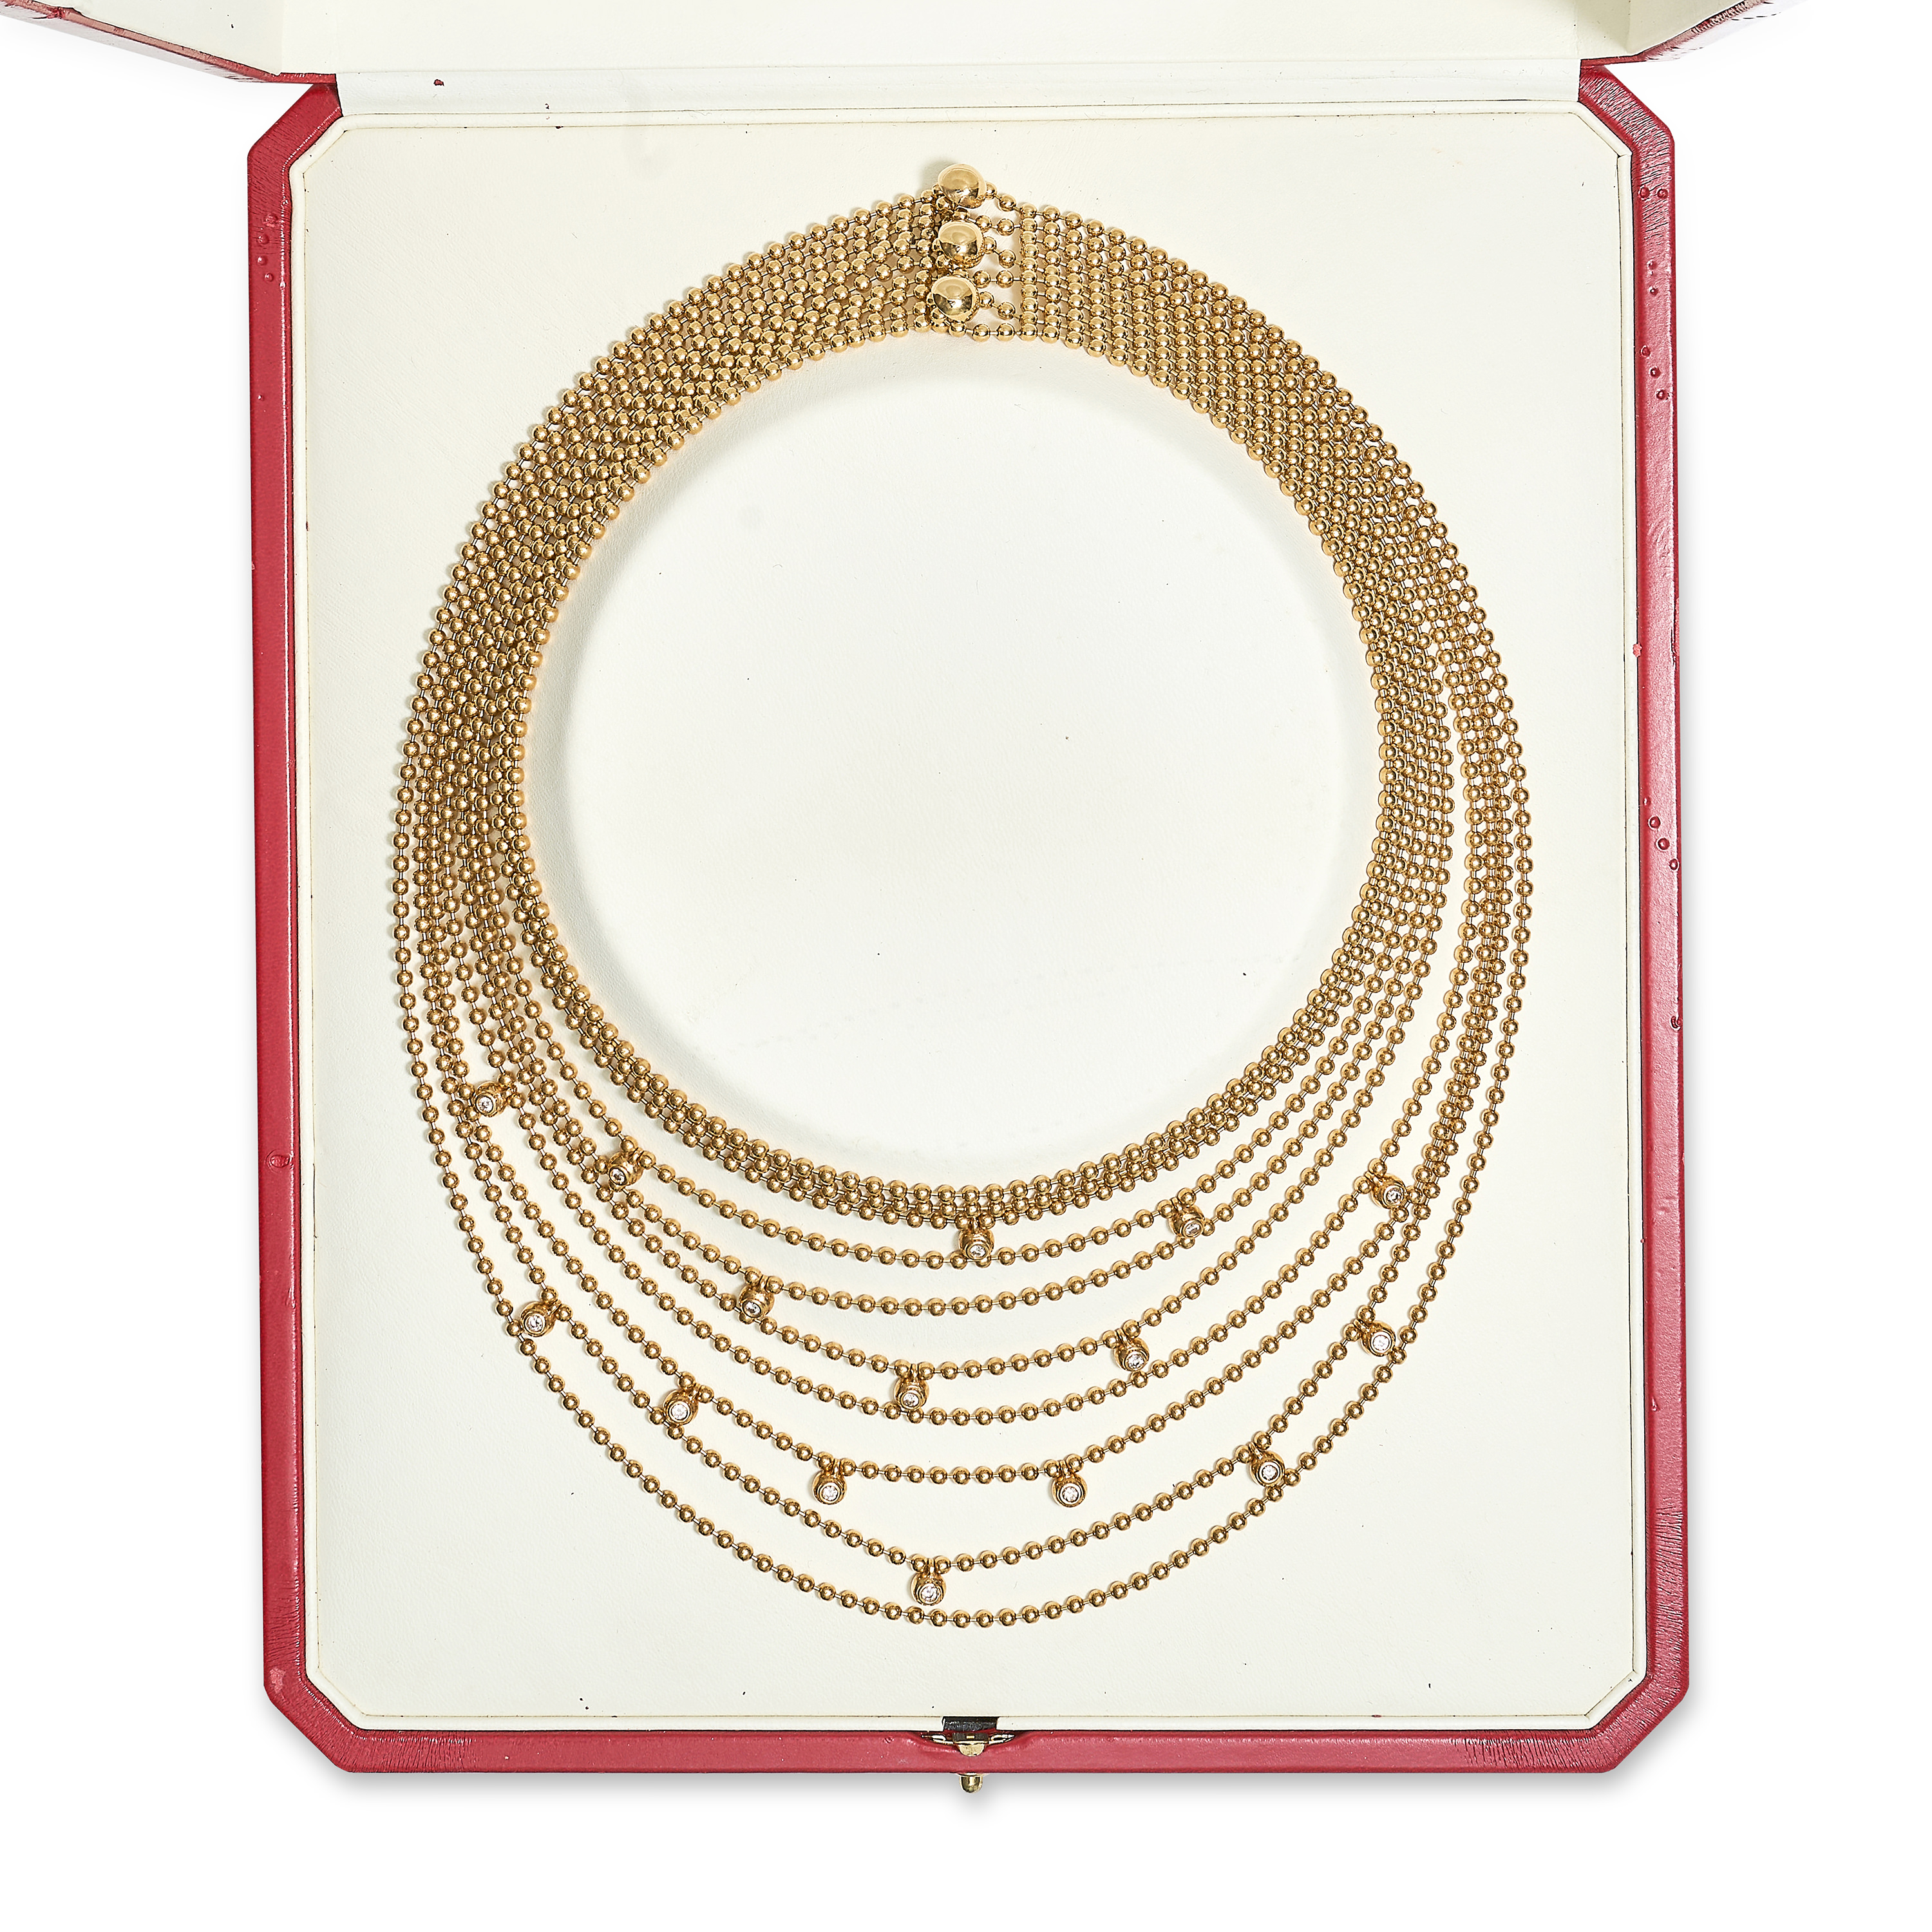 A DIAMOND AND GOLD BEAD NECKLACE in 18ct yellow gold, comprising ten rows of gold beads, fifteen - Image 2 of 2